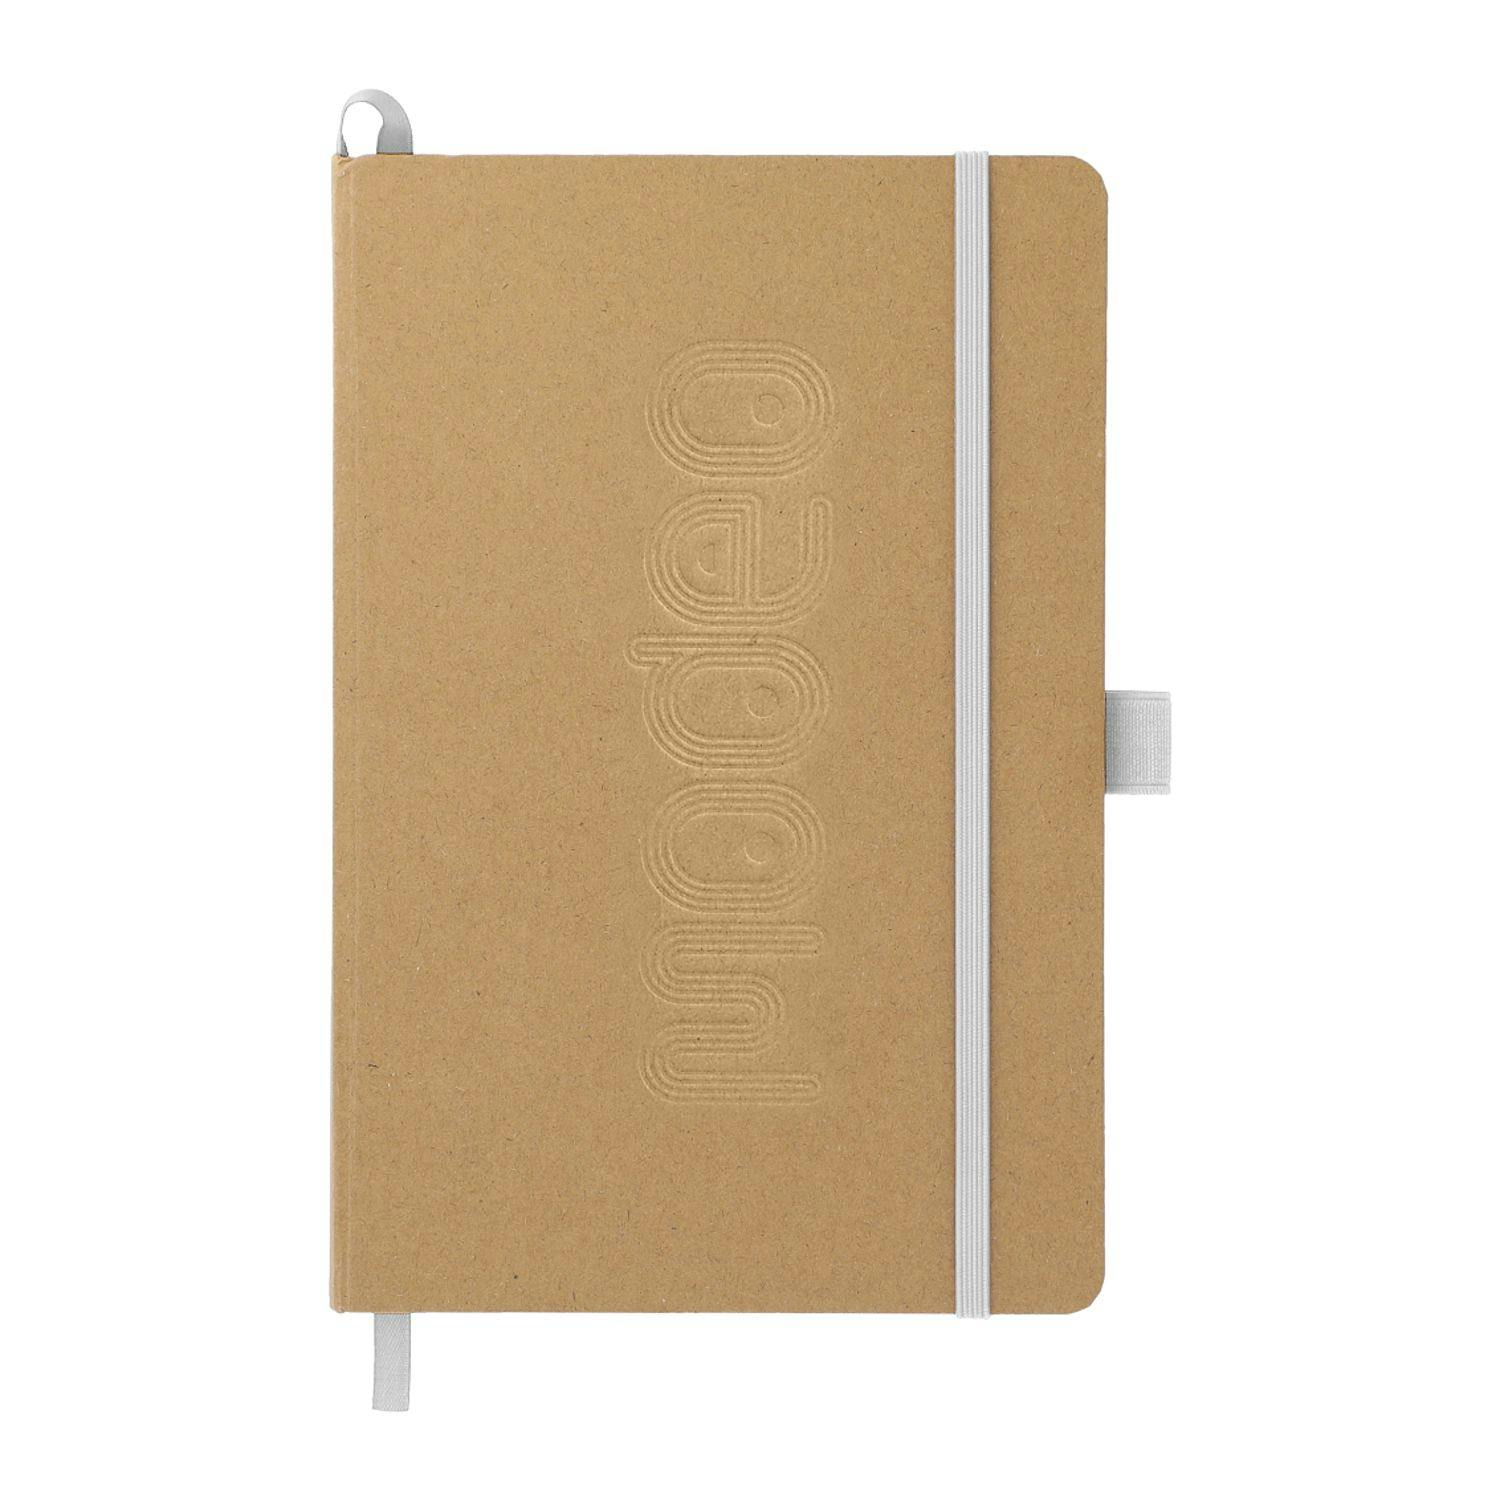 5.5" x 8.5" Eco Color Bound JournalBook® - additional Image 2